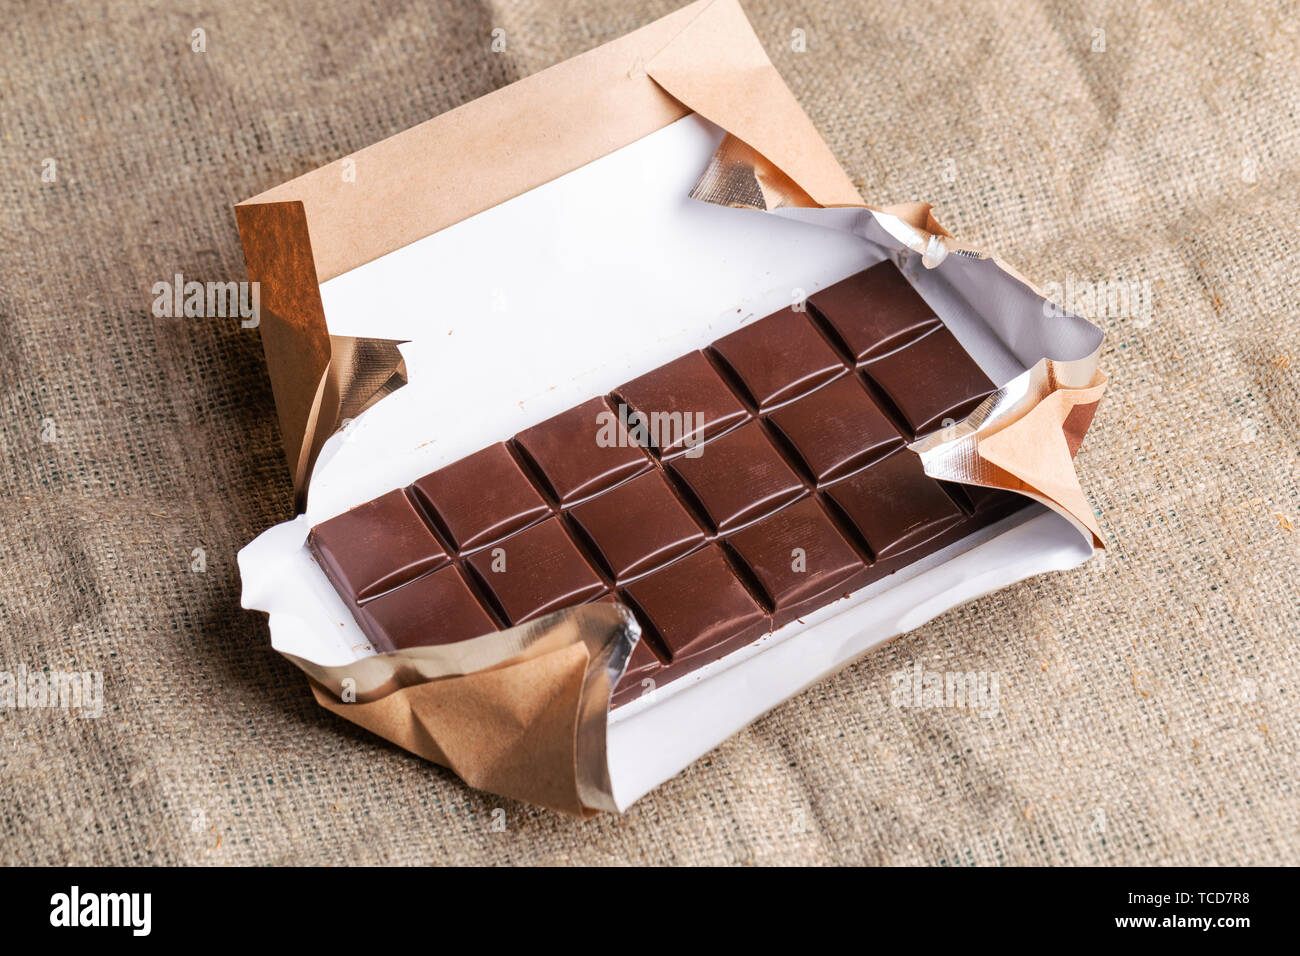 Chocolate bar in paper wrapper is lying on burlap. Stock Photo